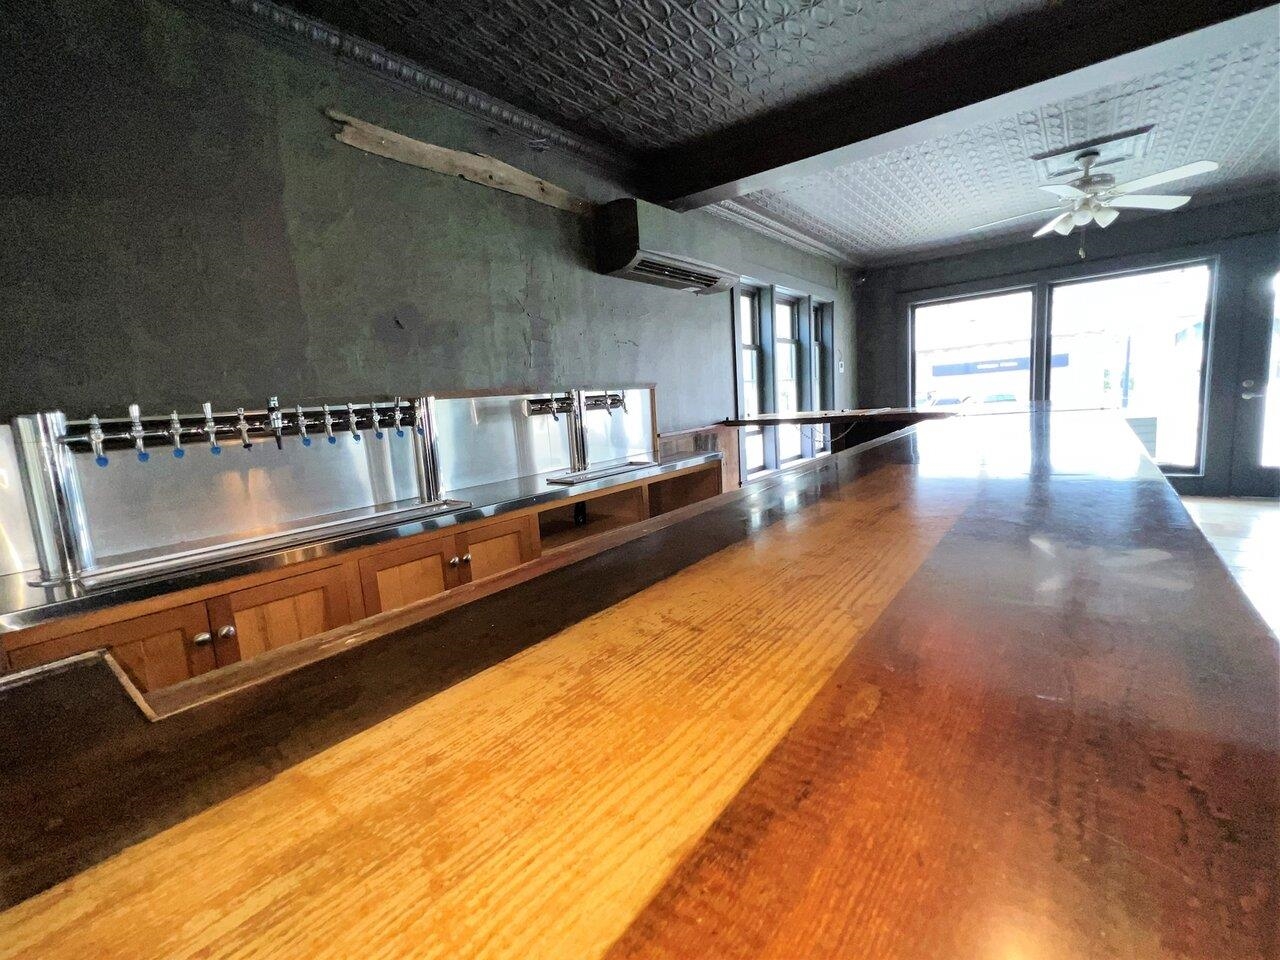 Full bar with 16 beer taps